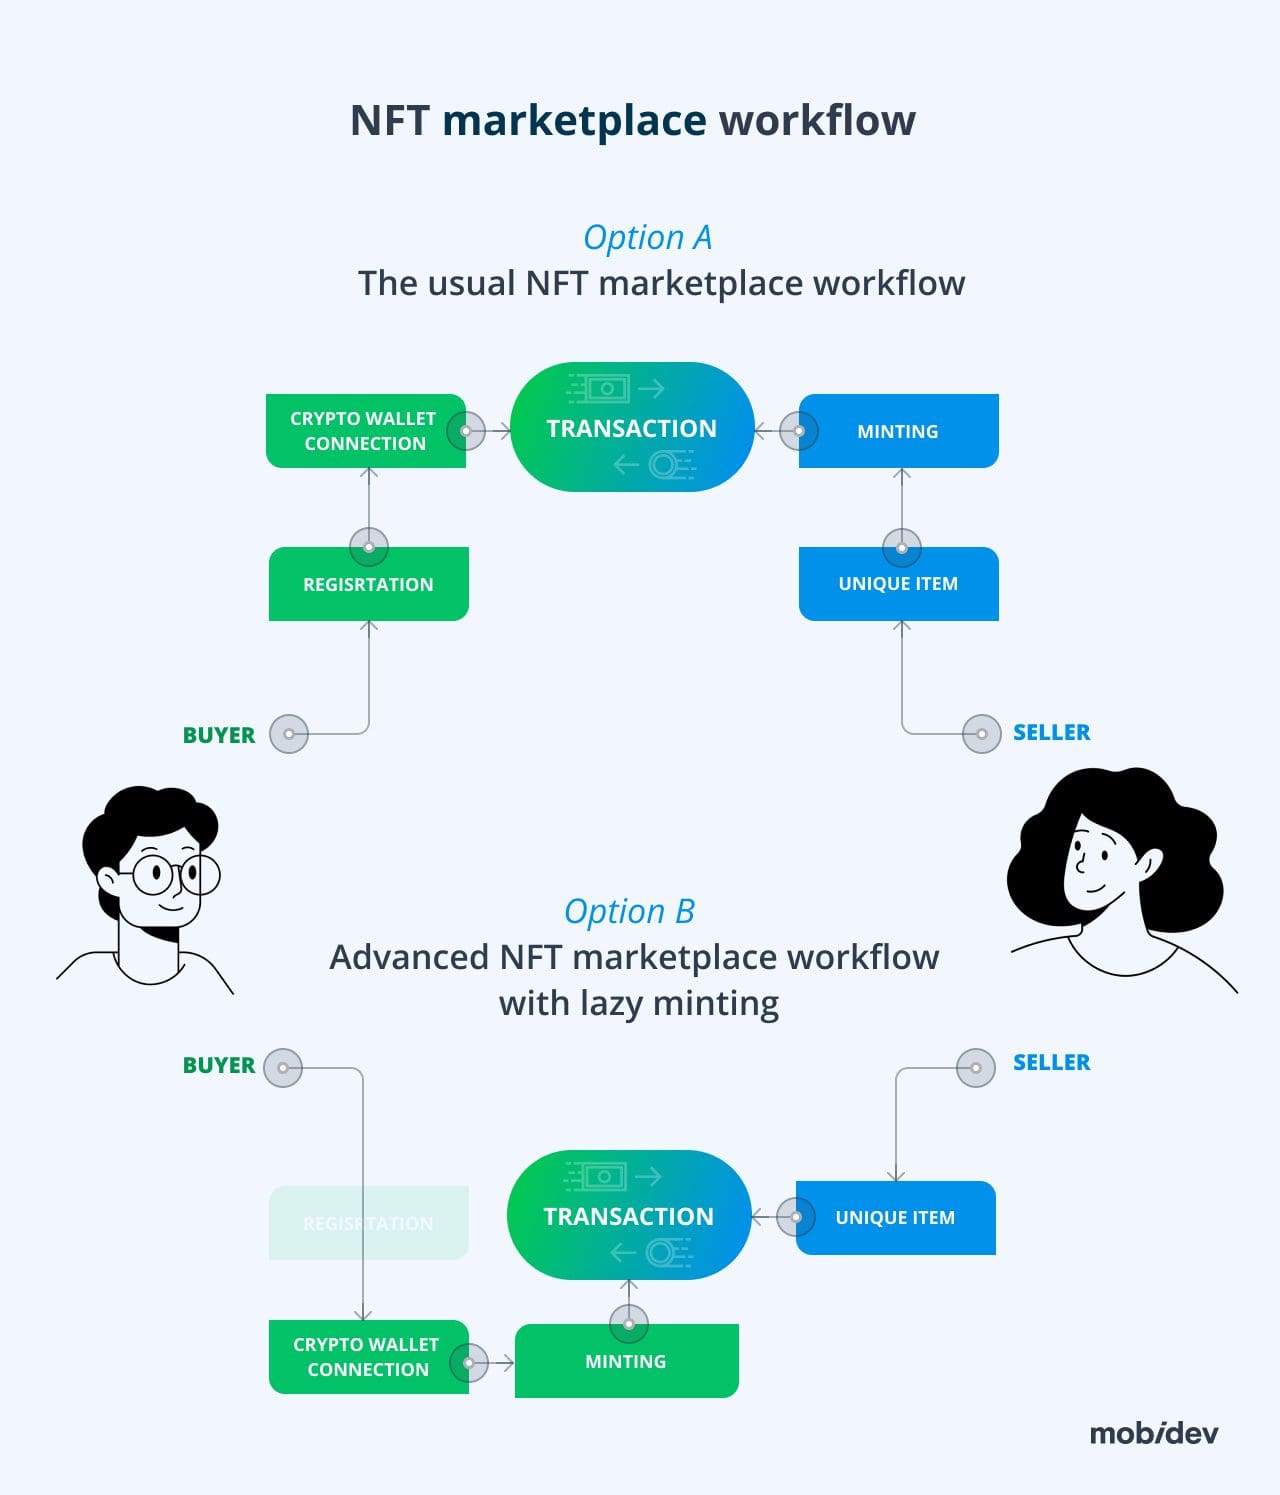 How the NFT marketplace works